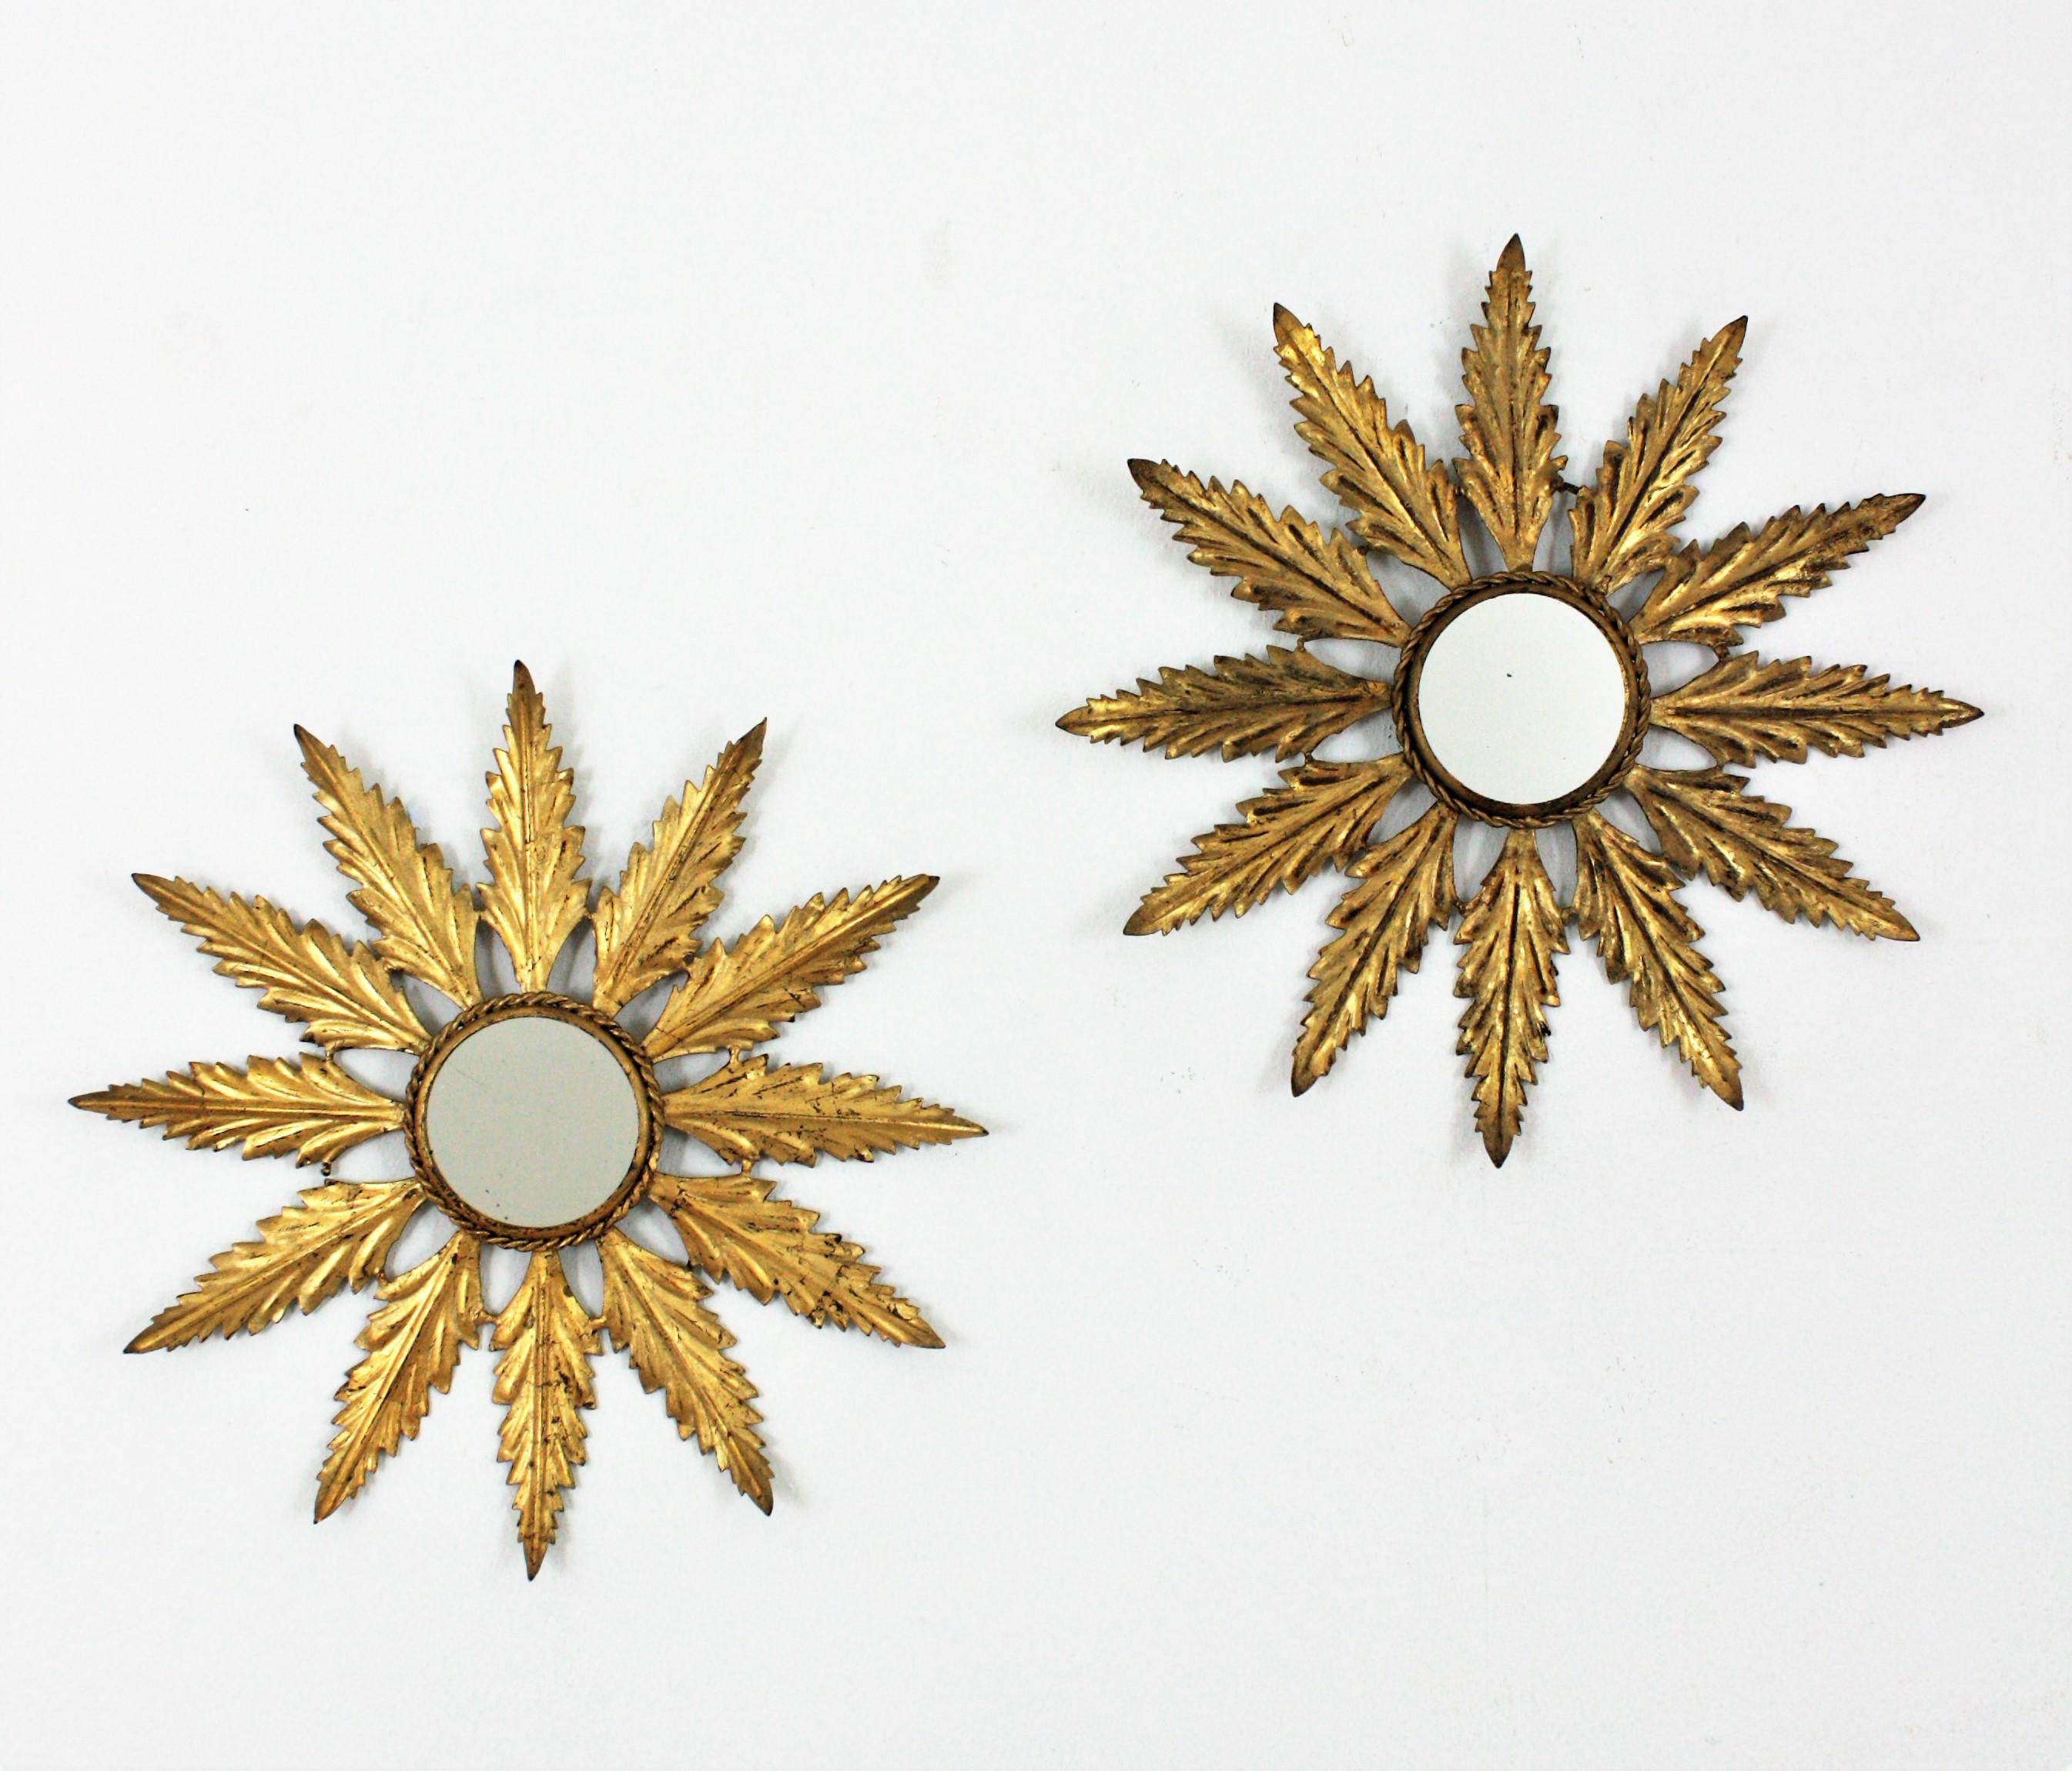 Eye-catching pair of hand-hammered gilt iron leafed sunburst mirrors in small size, Spain, 1940s-1950s.
The leafed frames in gilt iron finished with gold leaf have a nice aged patina. The small size and the clean design mark the difference in these